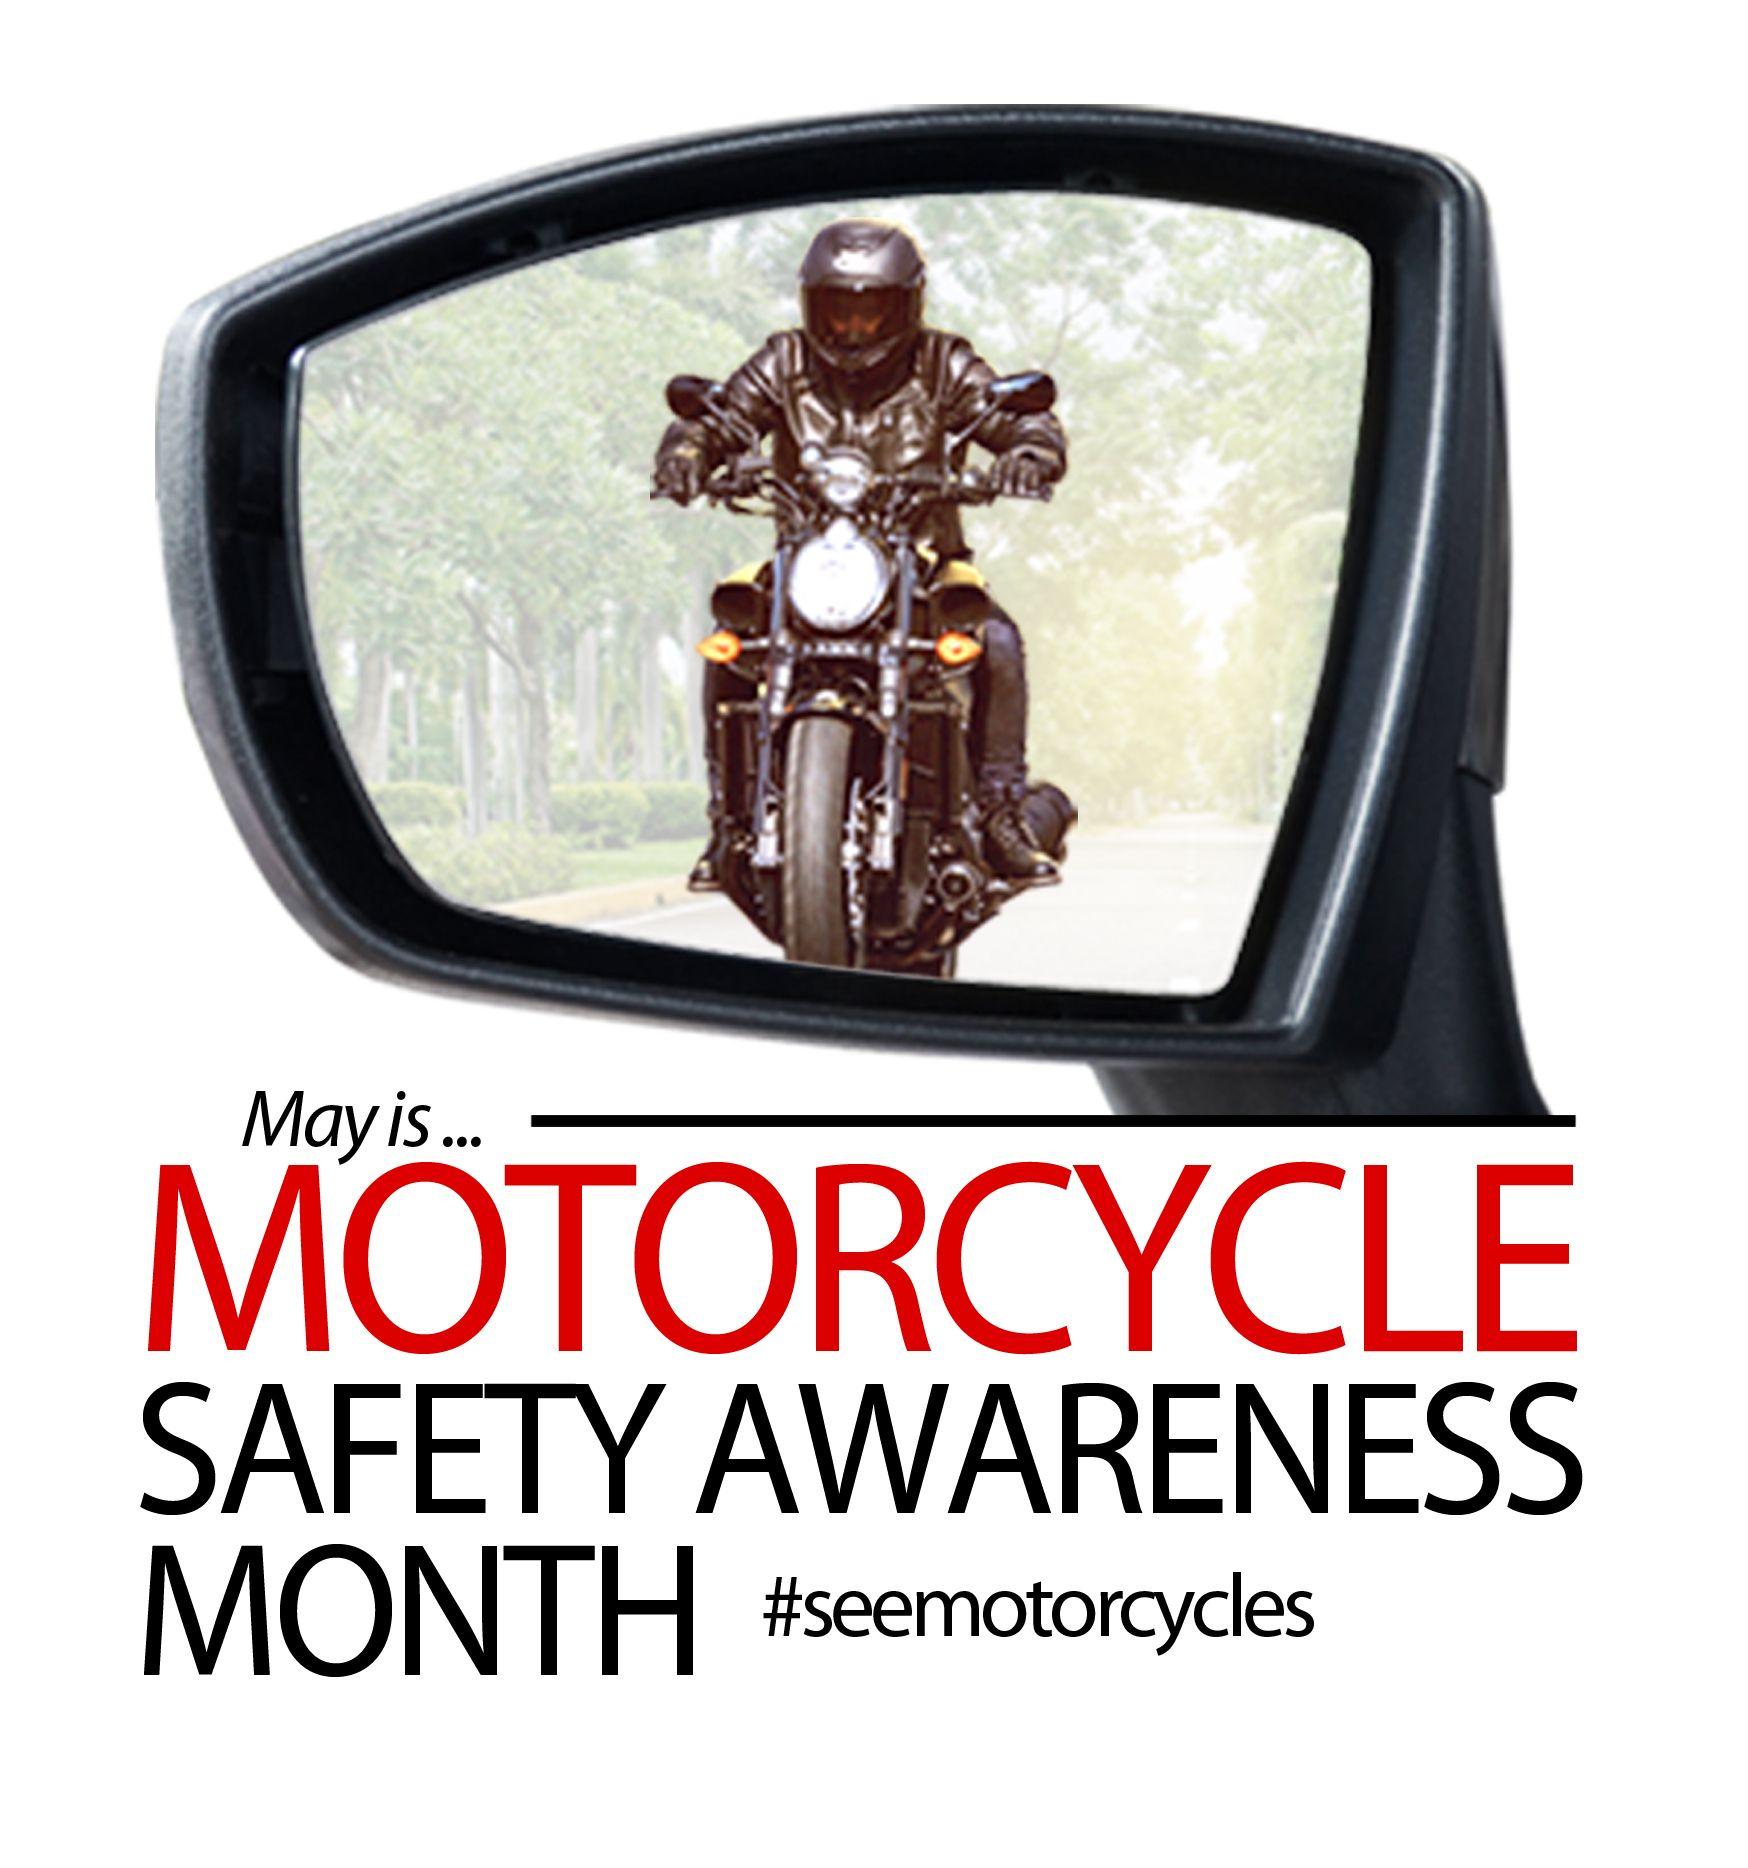 Motorcycle Safety Awareness Revs Up 